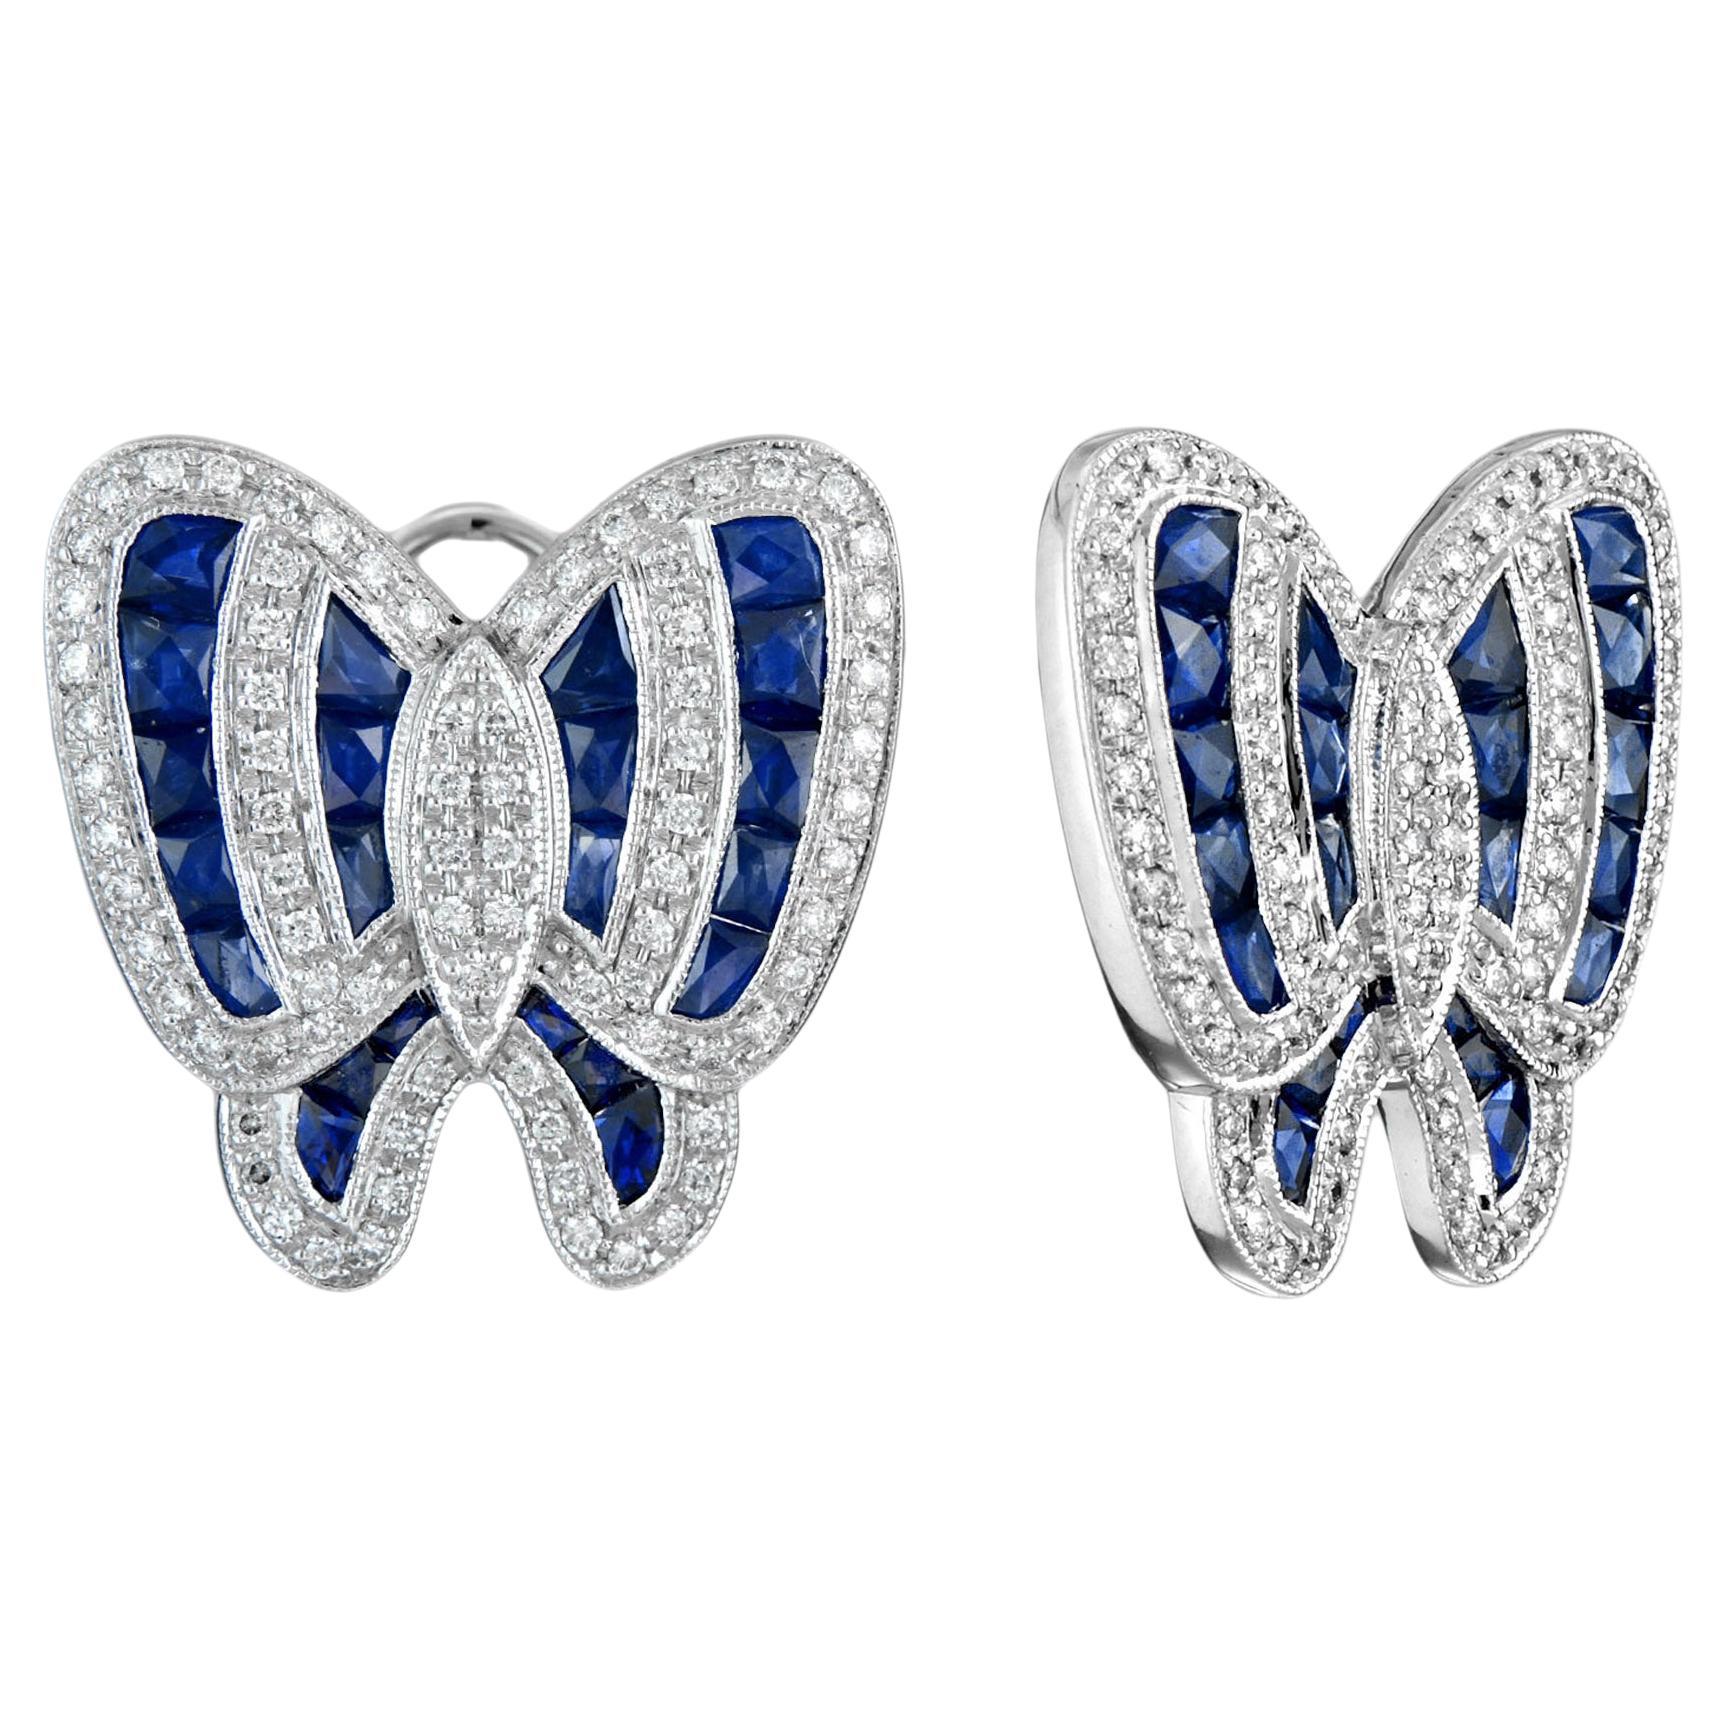 Diamond and Sapphire Butterfly Earrings in 18k White Gold